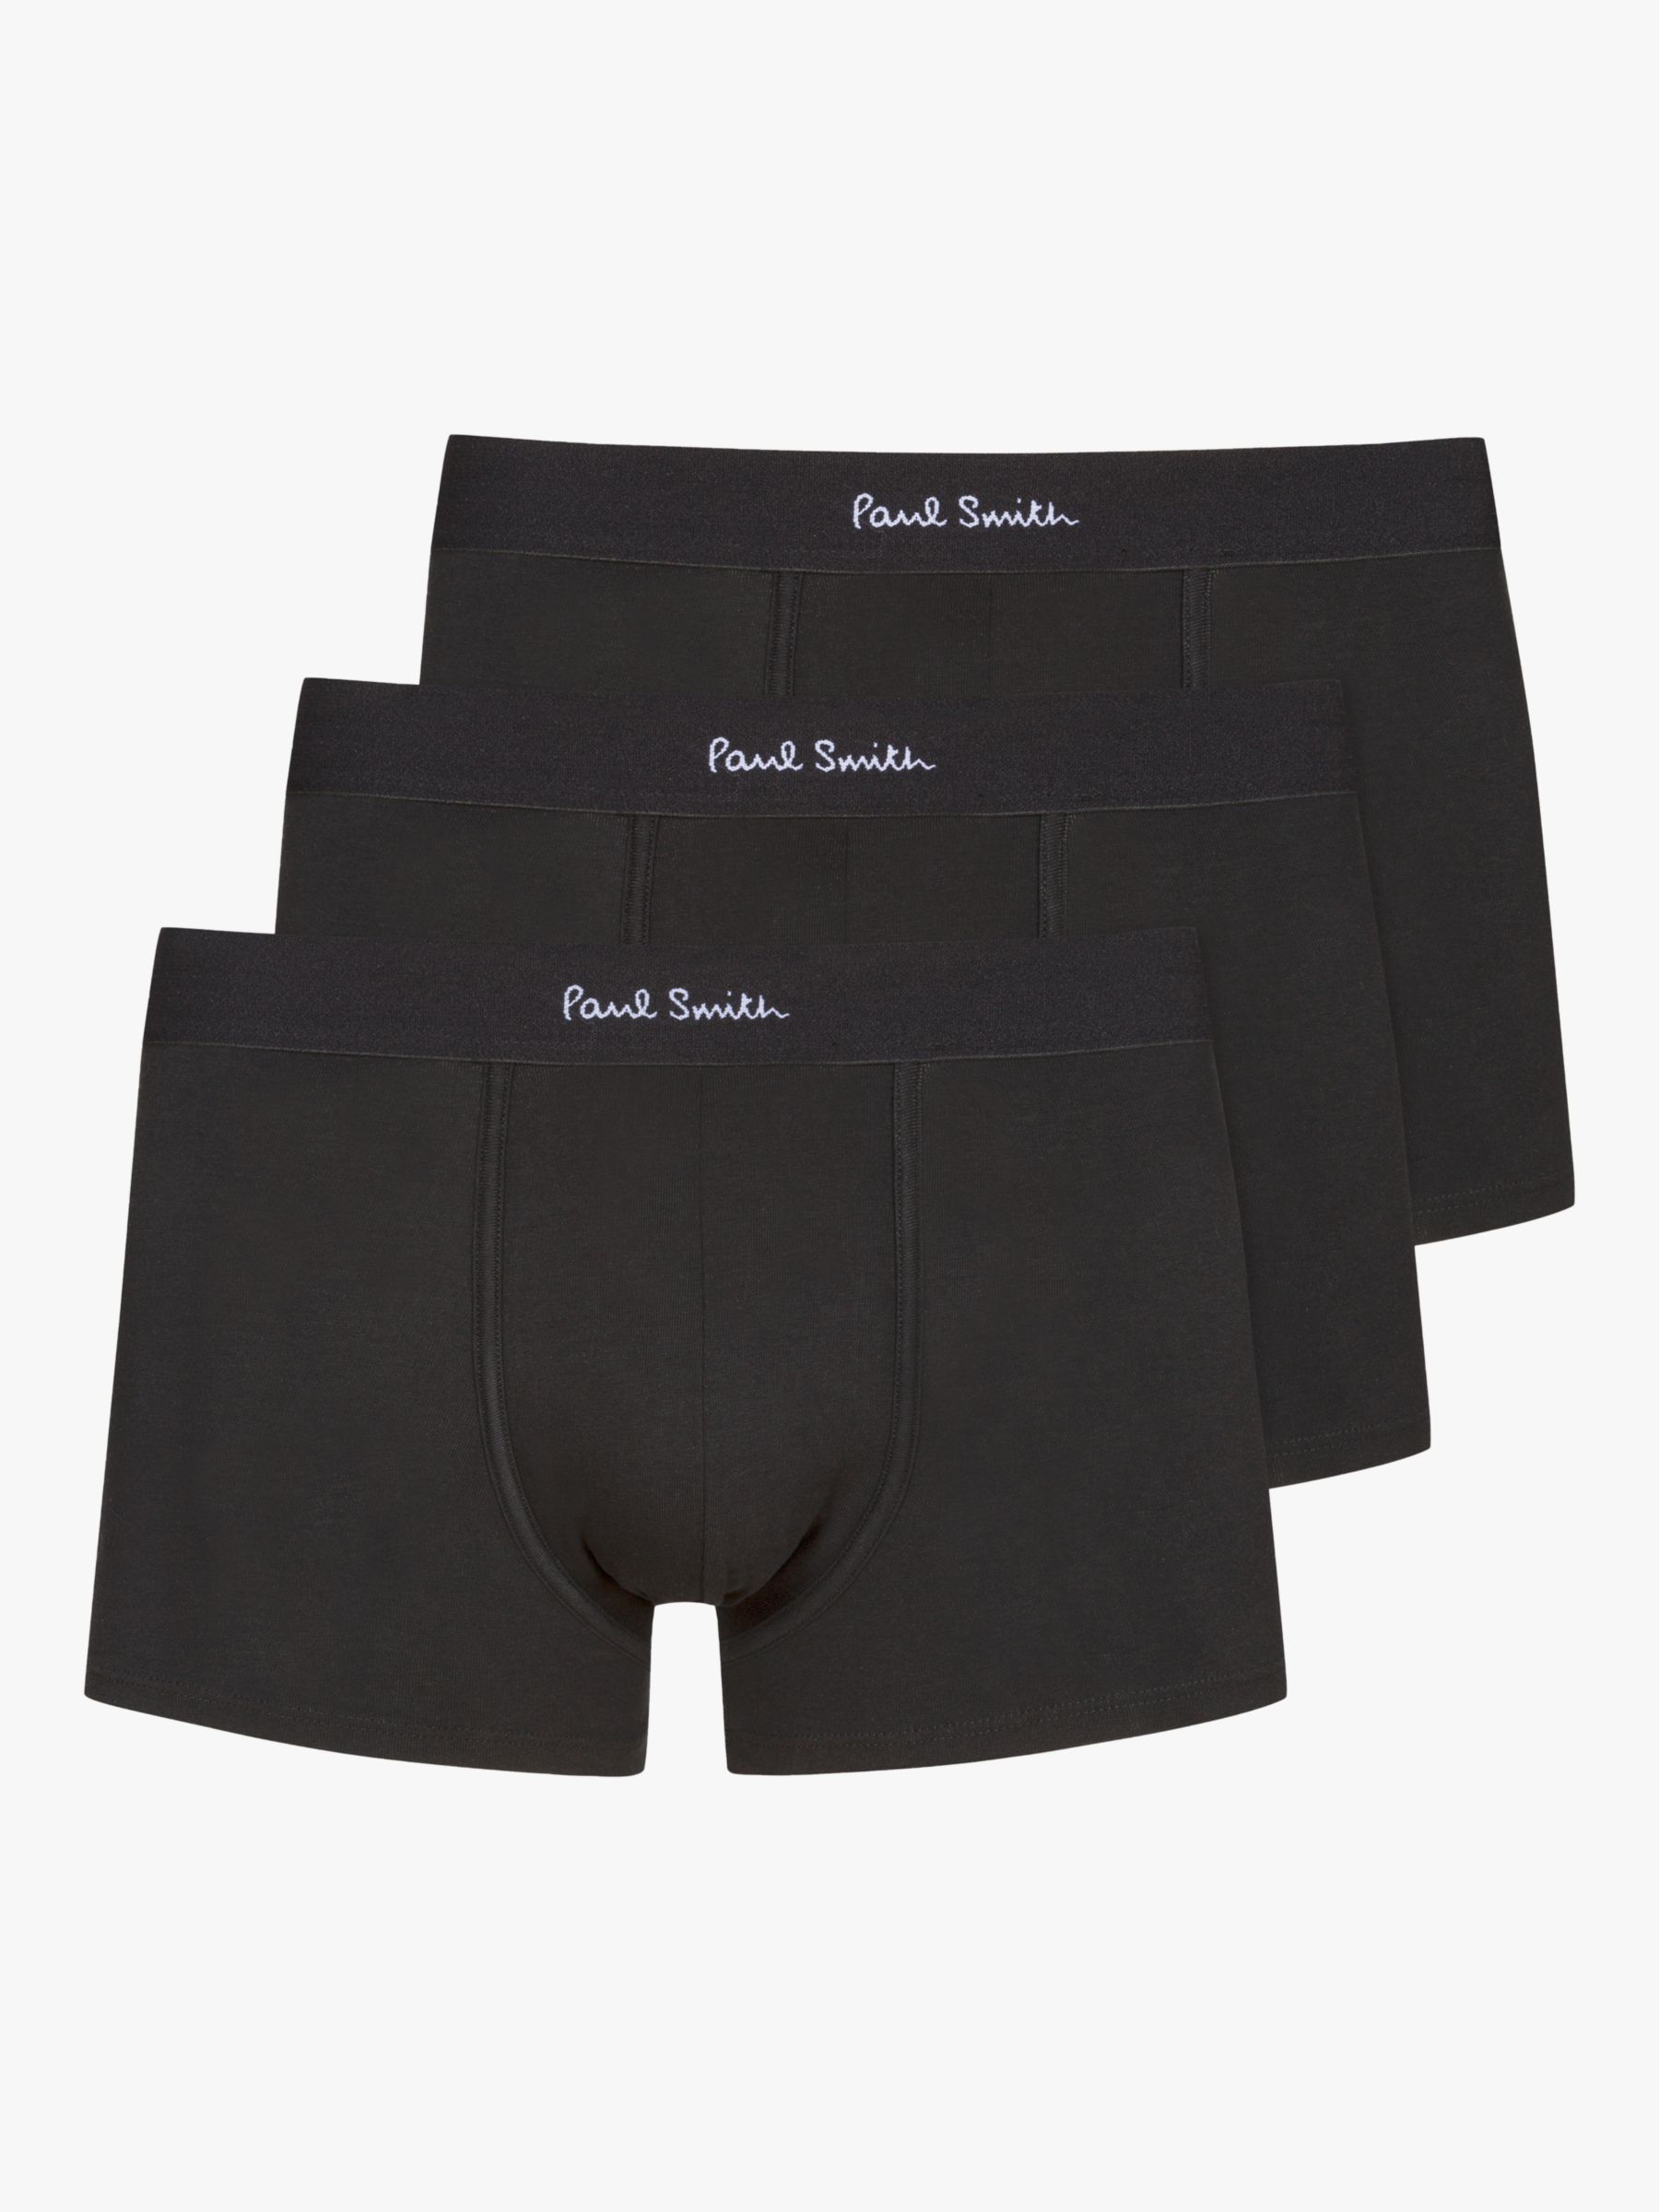 Paul Smith Paul Smith Stretch Cotton Trunks, Pack of 3, Black